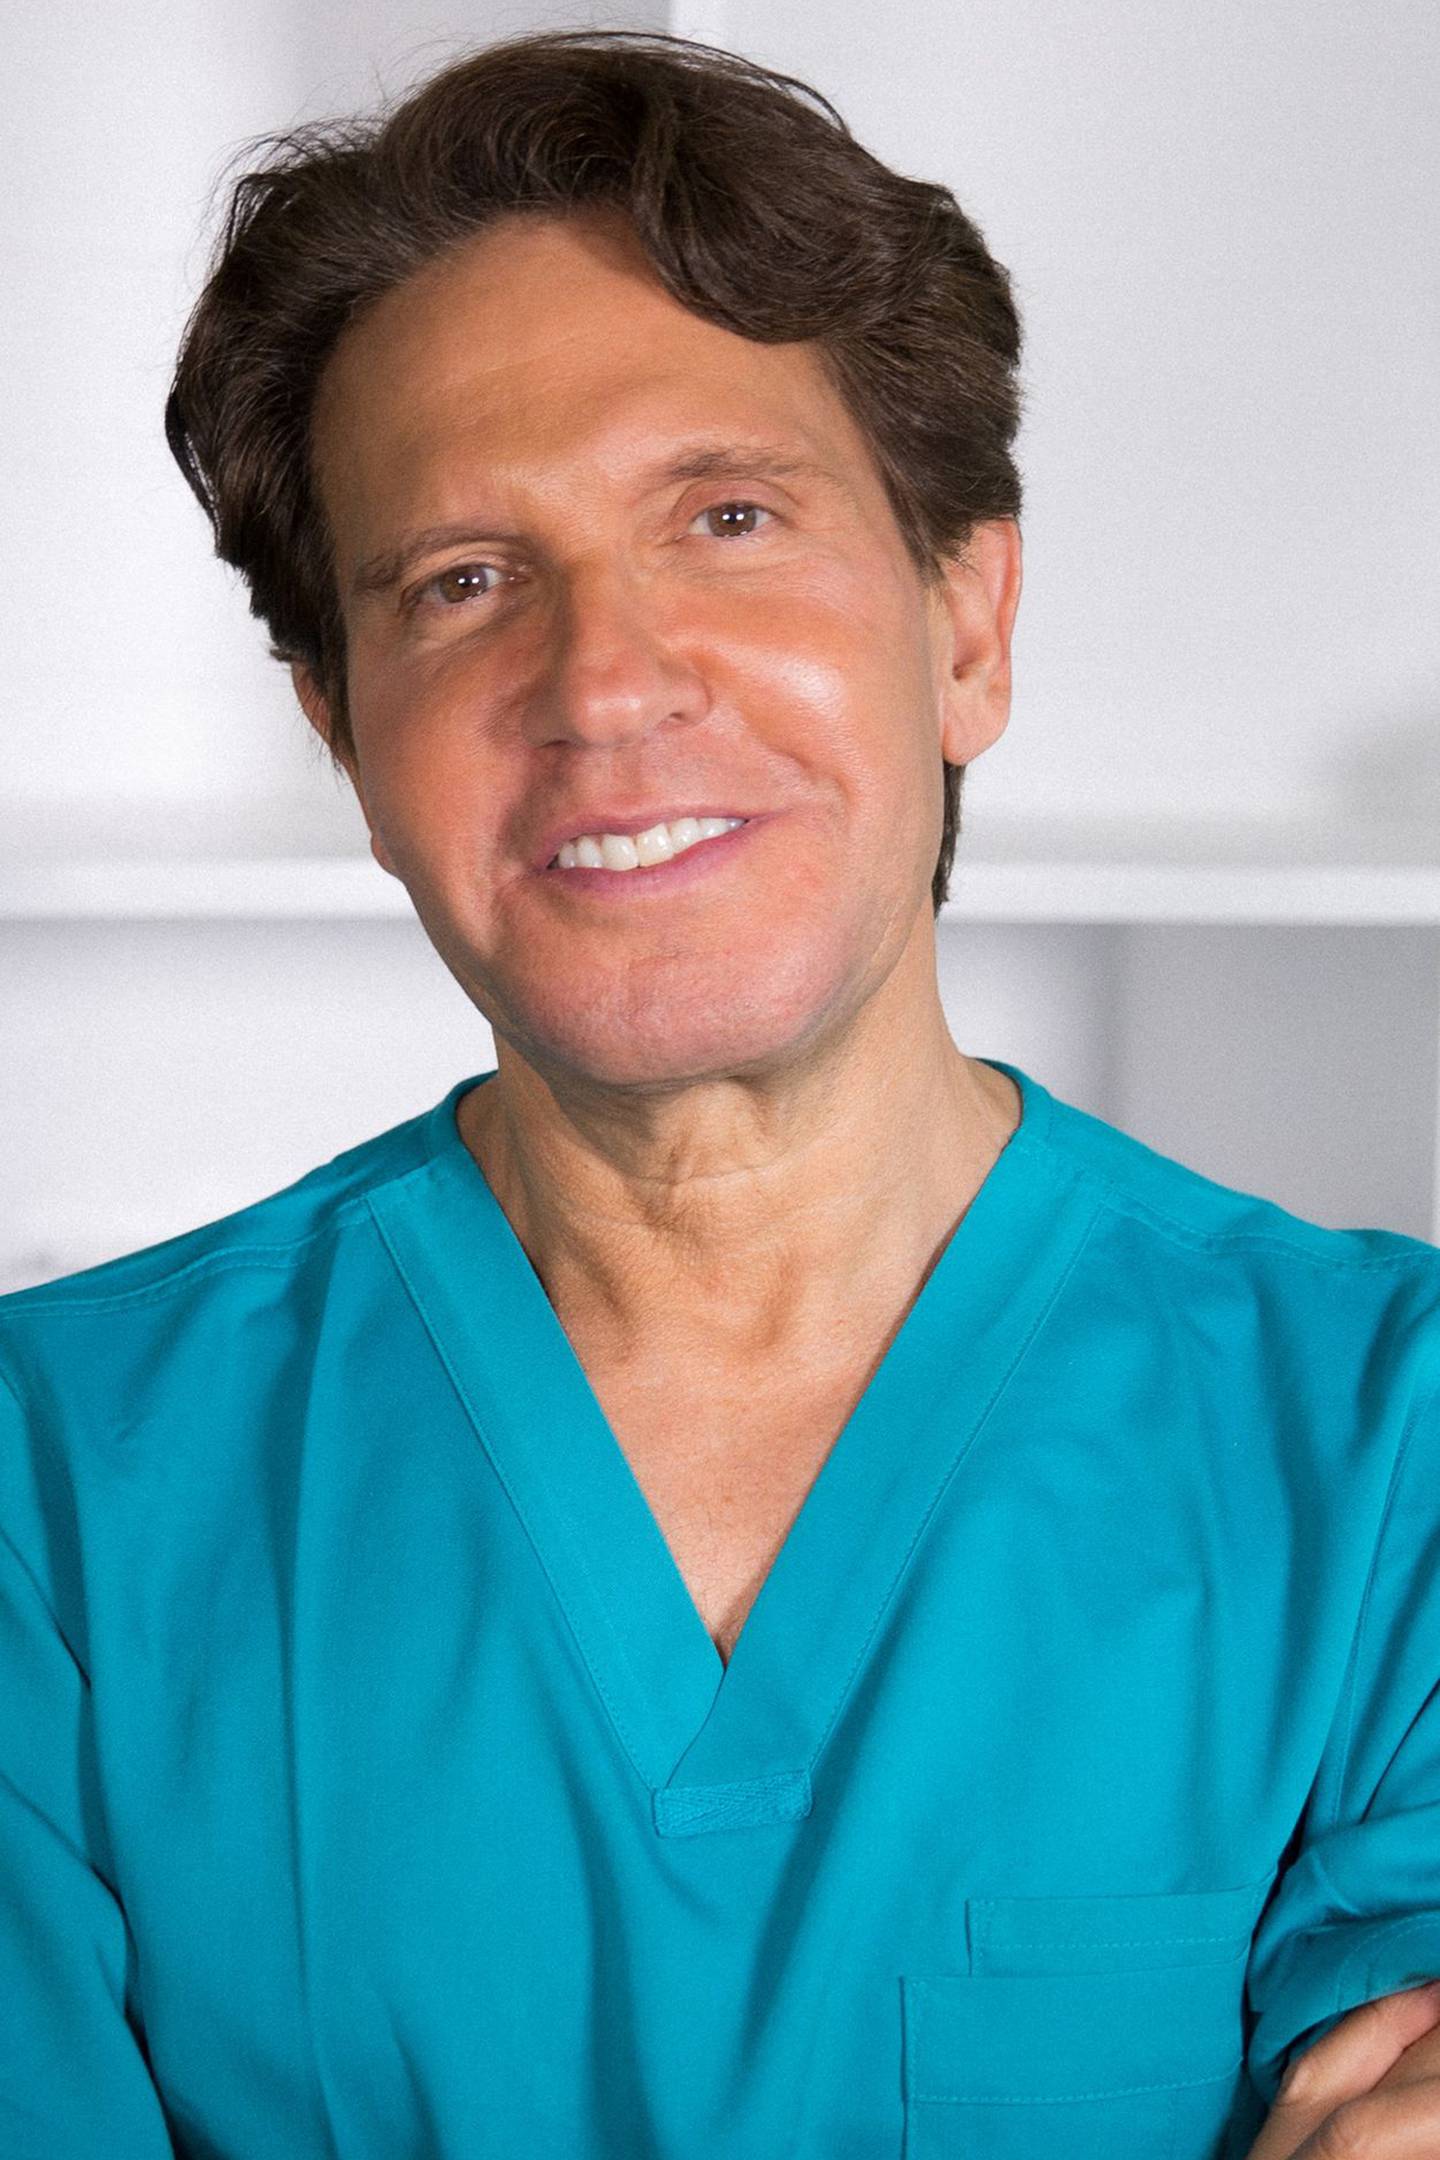 Dr. Dennis Gross - board-certified dermatologist, dermatologic surgeon and co-founder of his eponymous skin care brand.